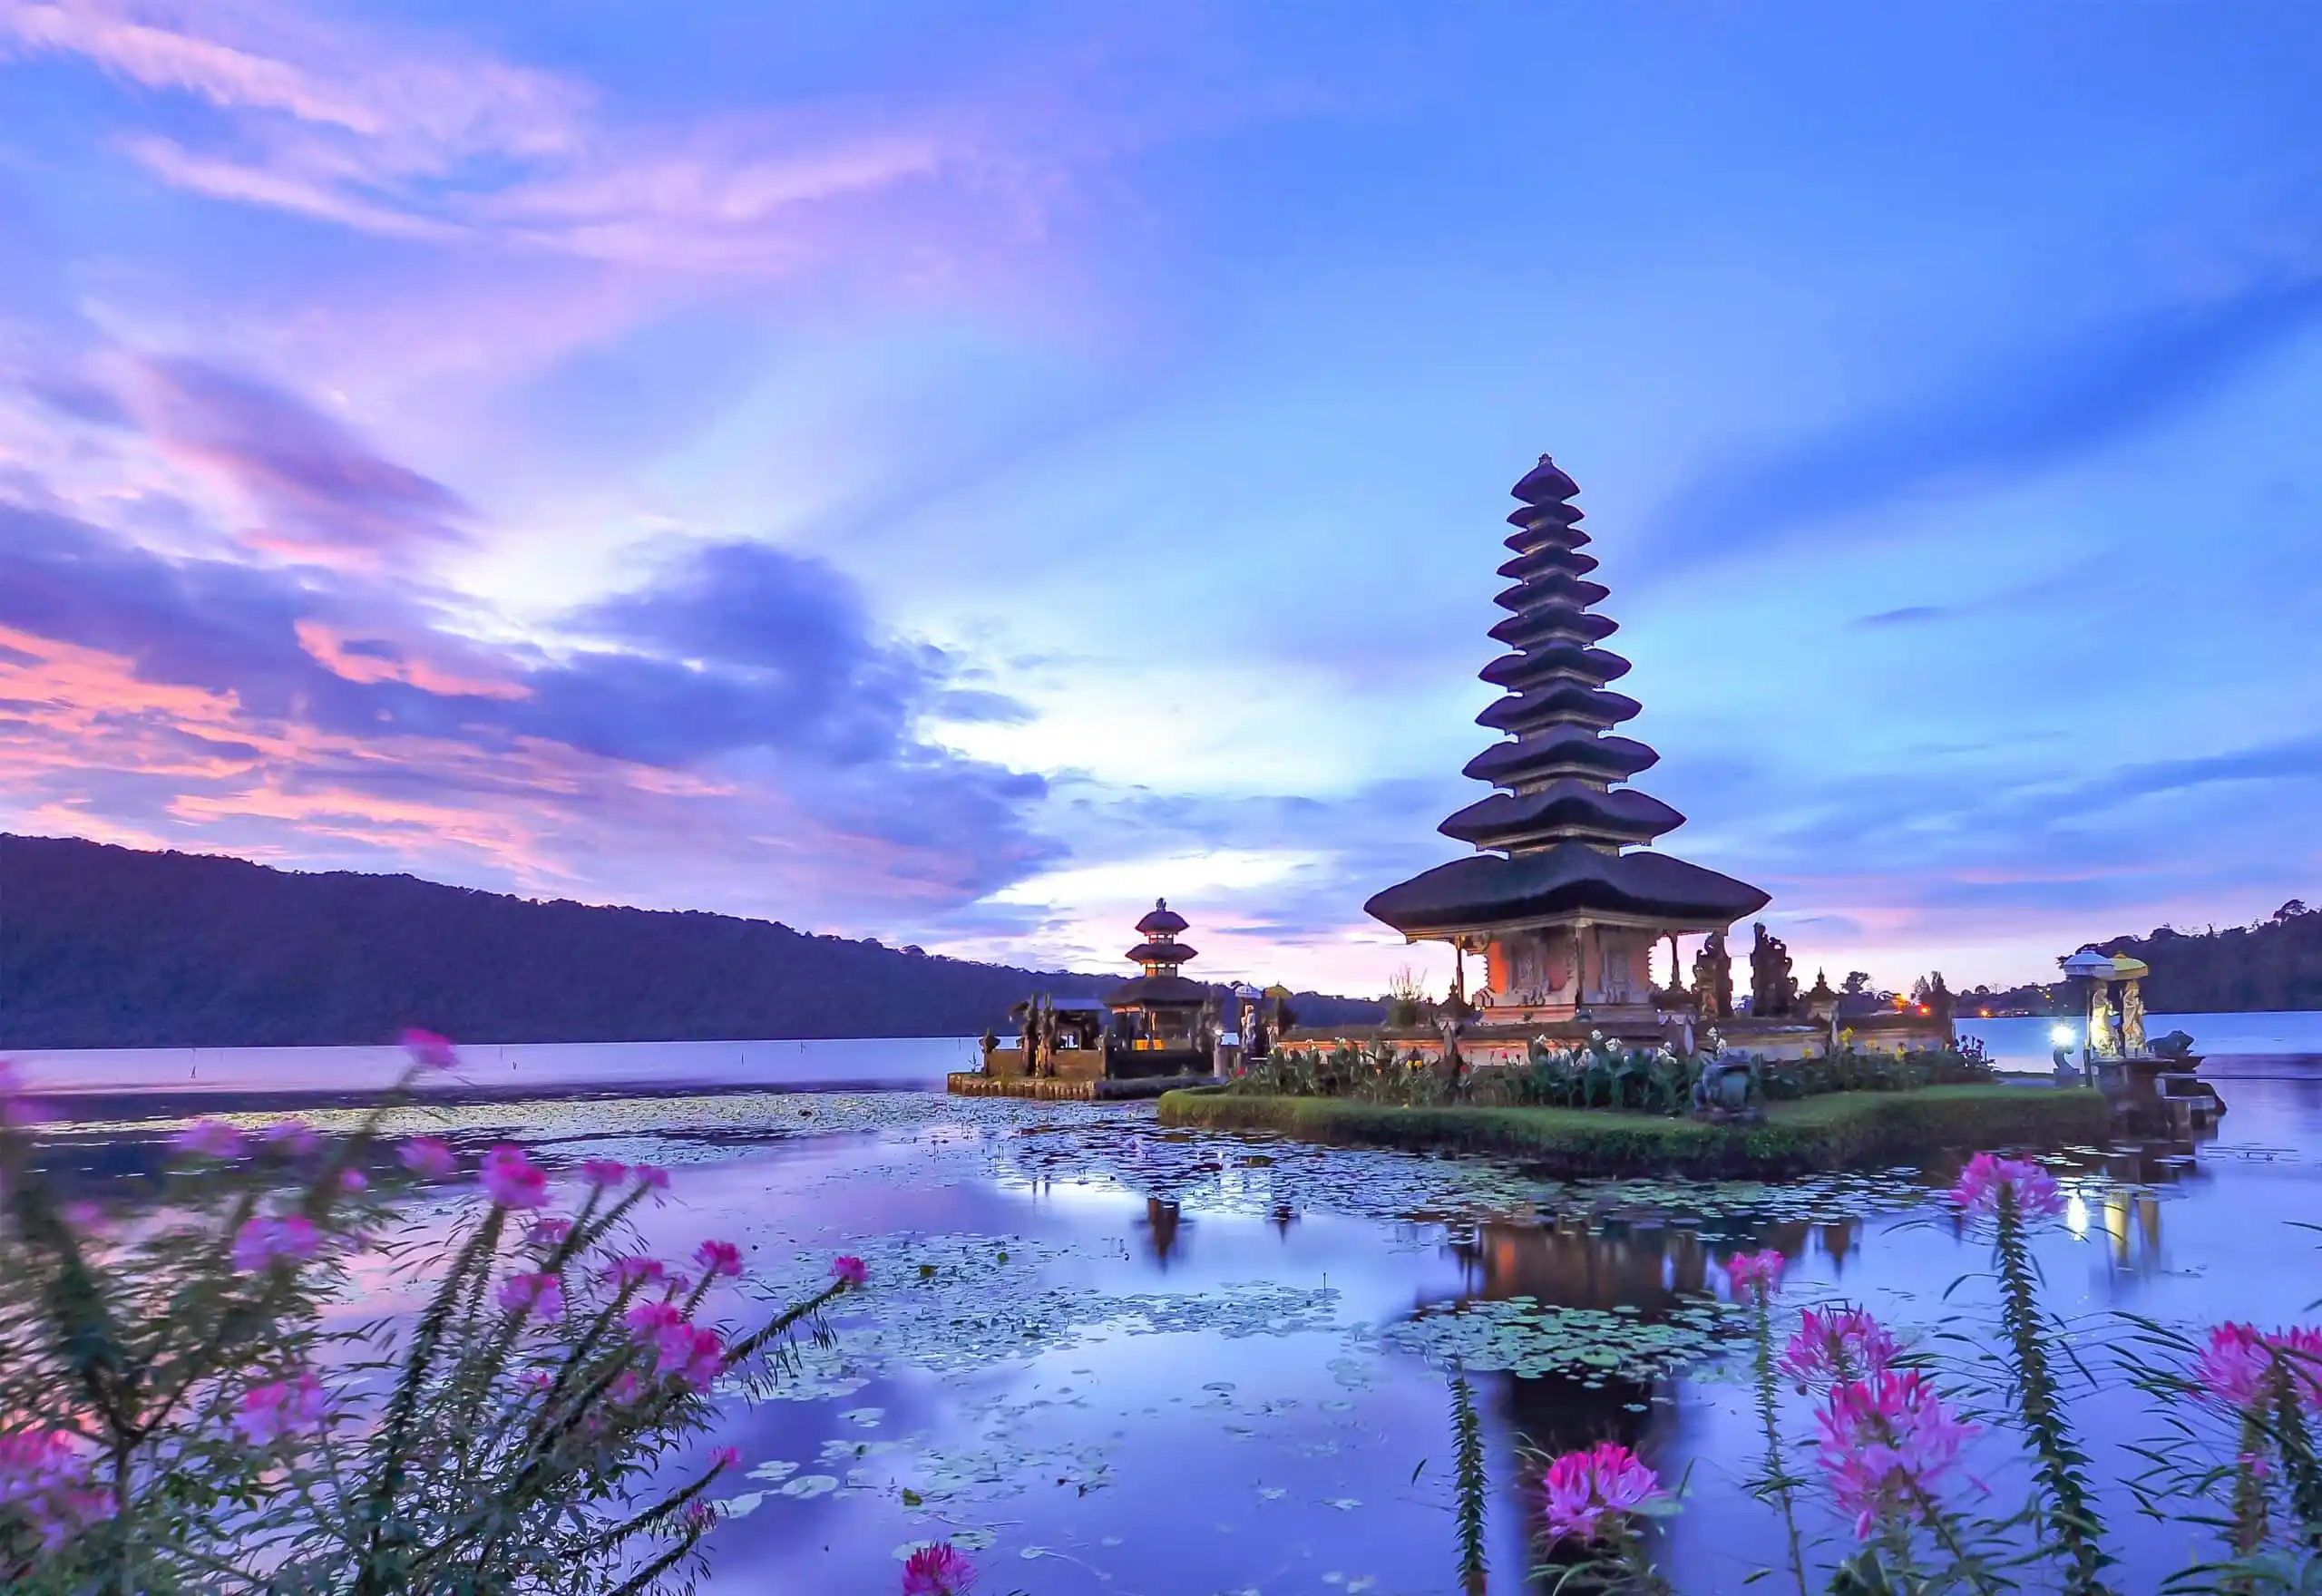 Facilities Management Training Courses in Bali